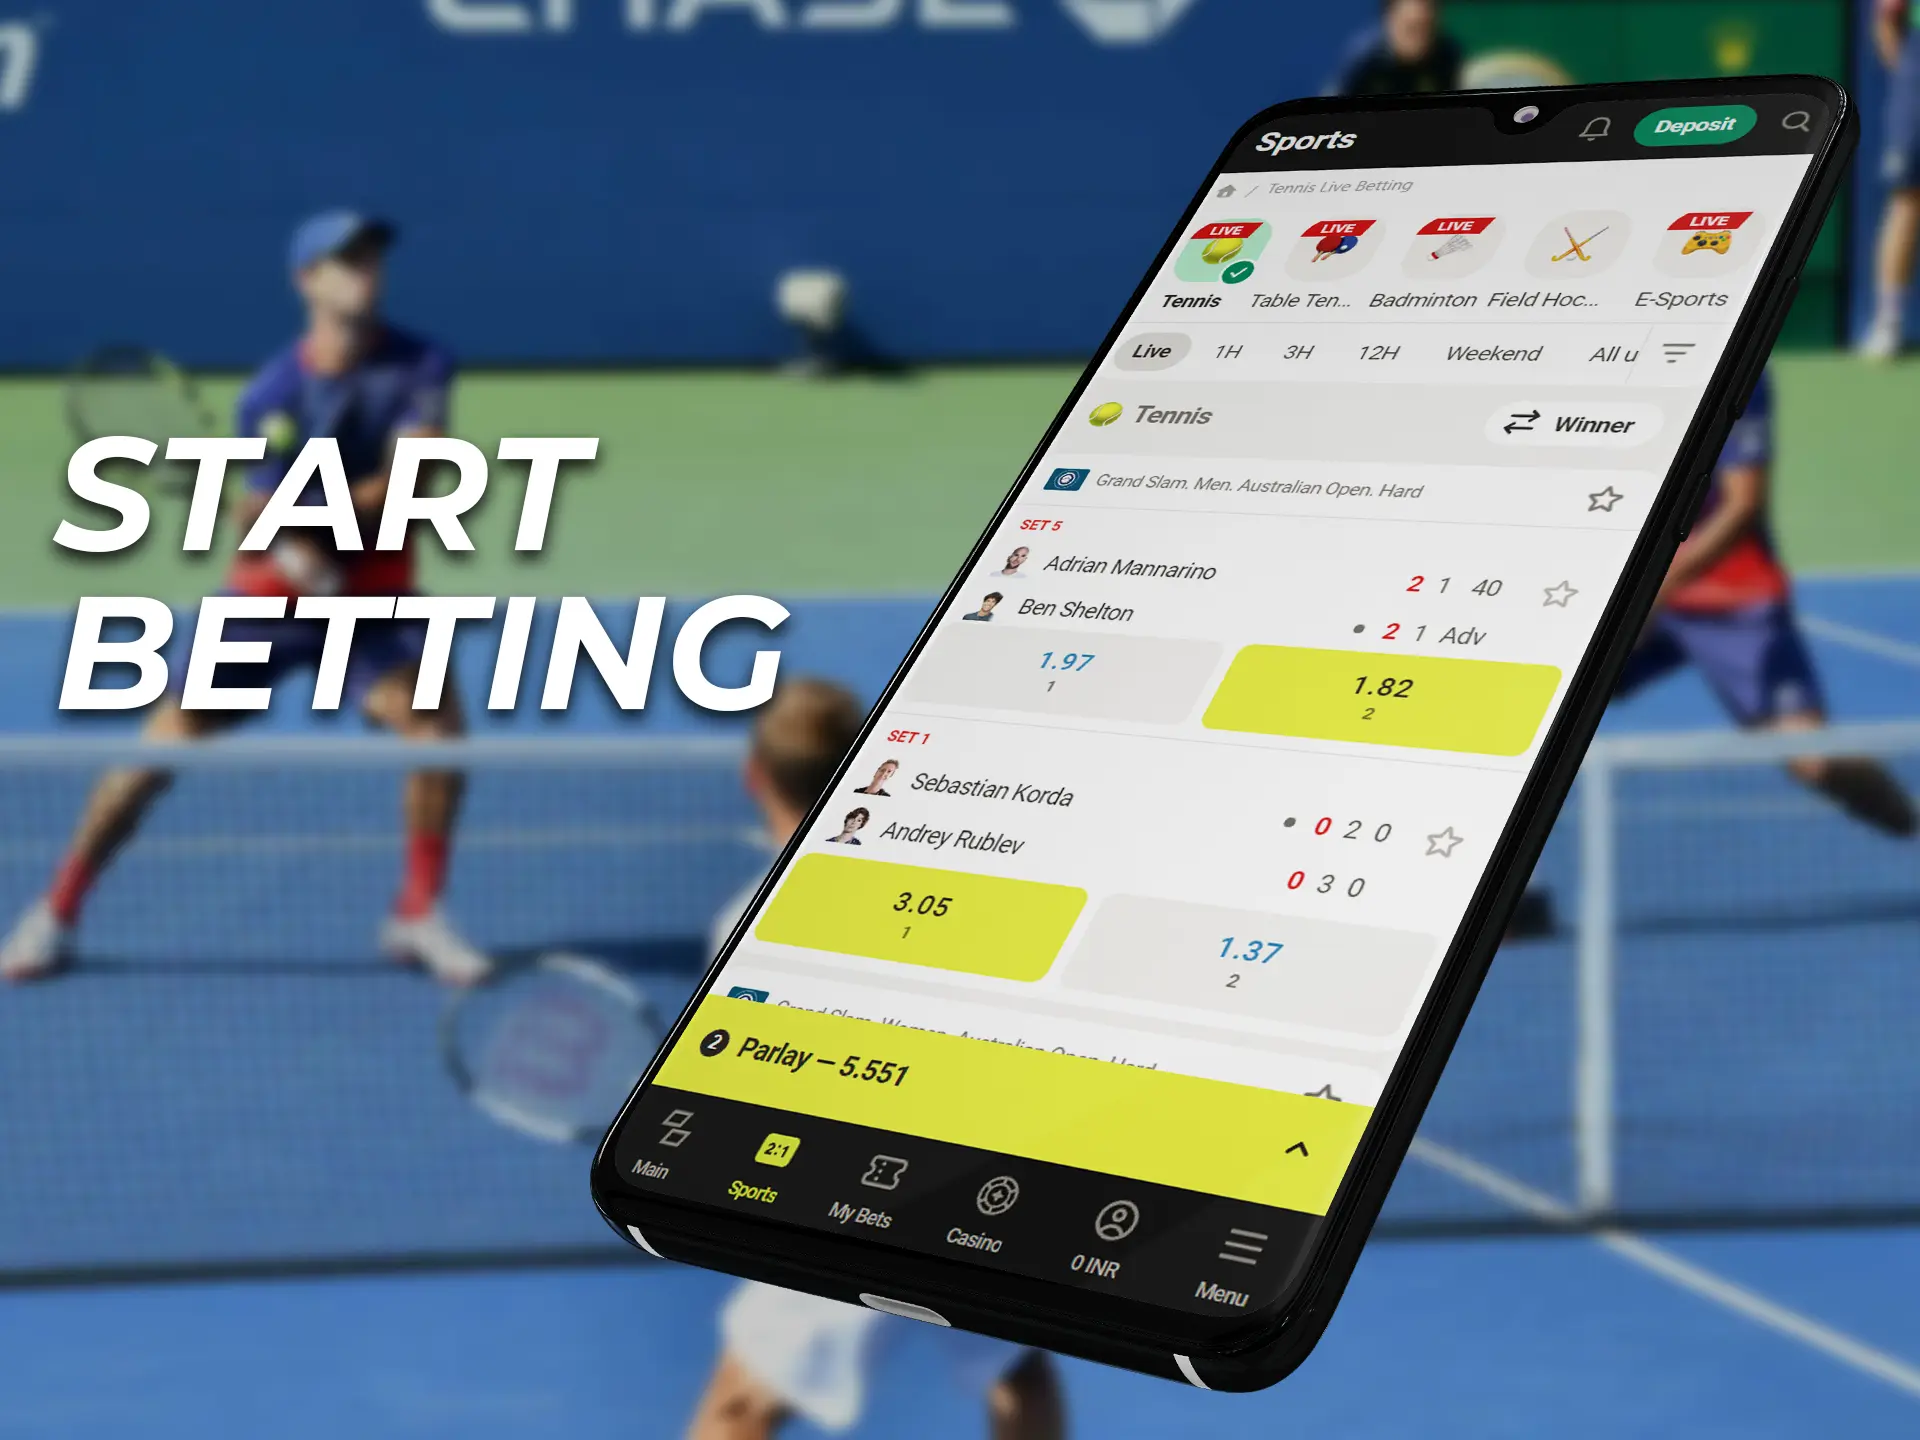 To start betting on tennis use the step-by-step instructions.